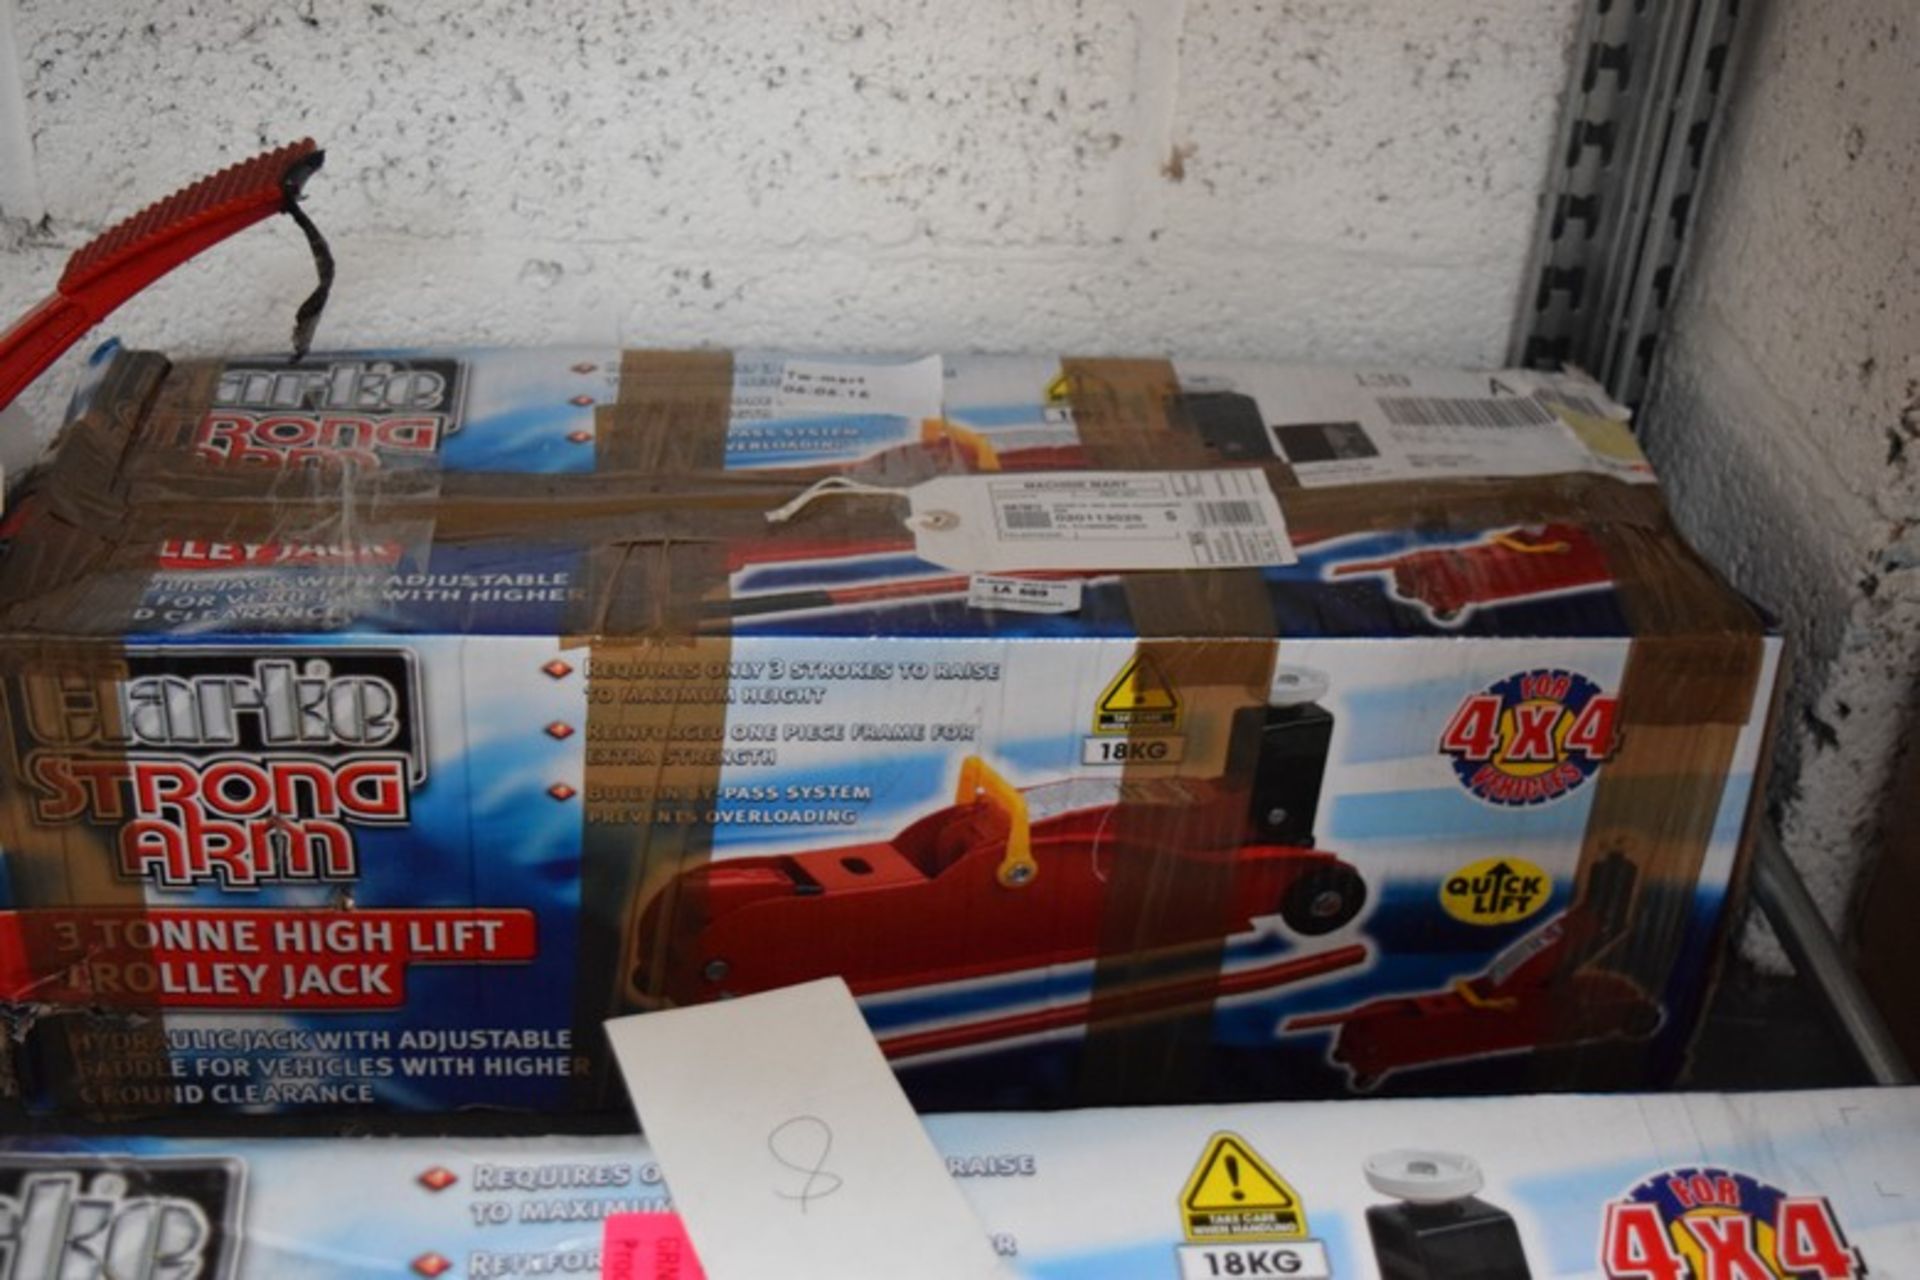 1 X BOXED CLARKE STRONG ARM 3 TON HIGH LIFT TROLLEY JACK RRP £50 (06.06.16)